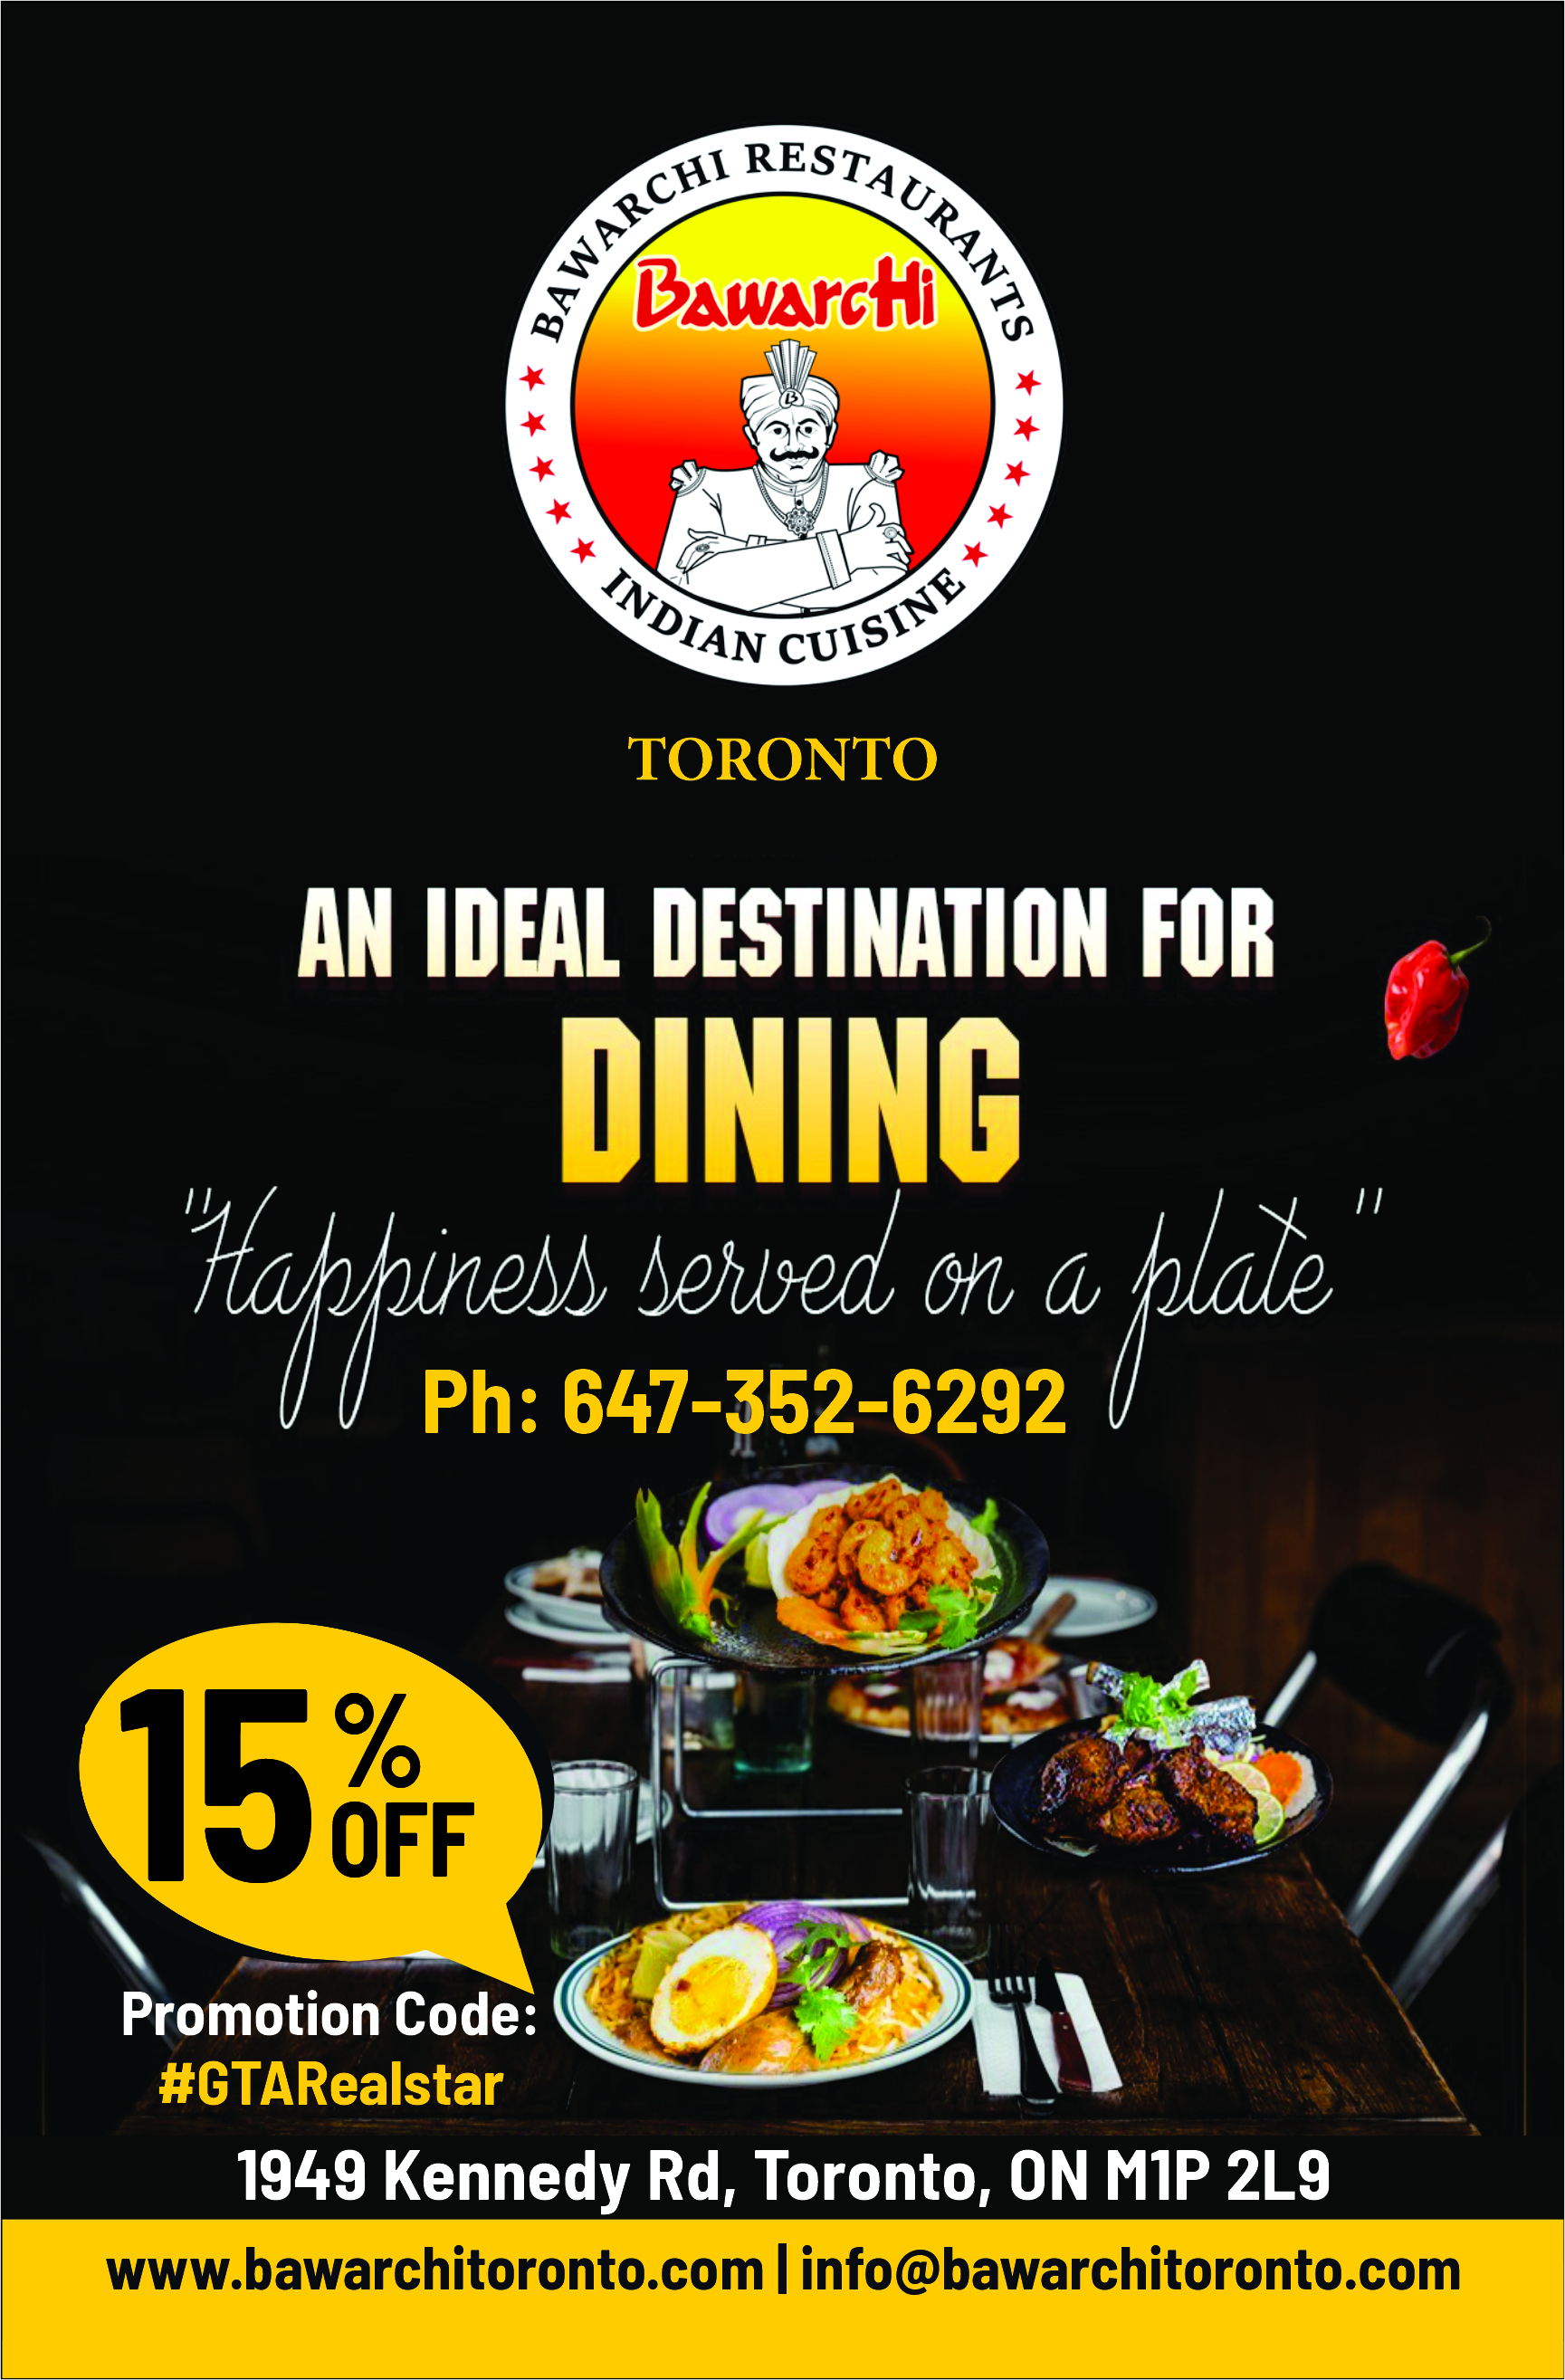 15% Off on Dining with Flyer Promotion Code #GTARealstar